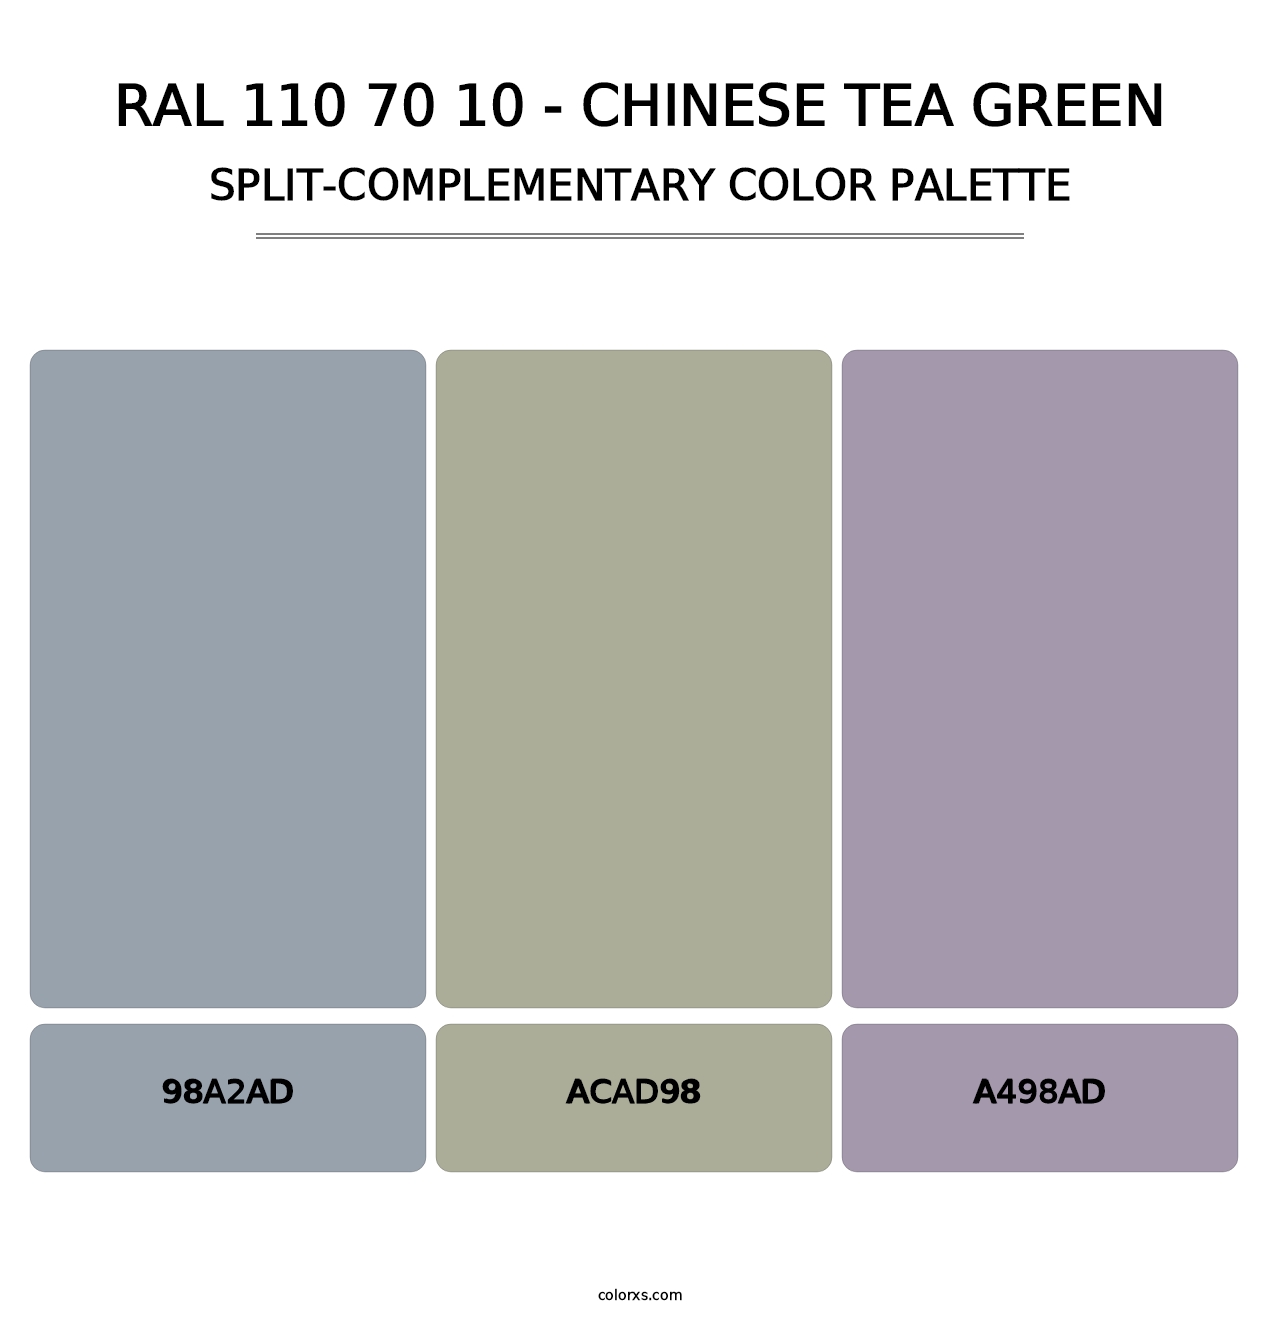 RAL 110 70 10 - Chinese Tea Green - Split-Complementary Color Palette